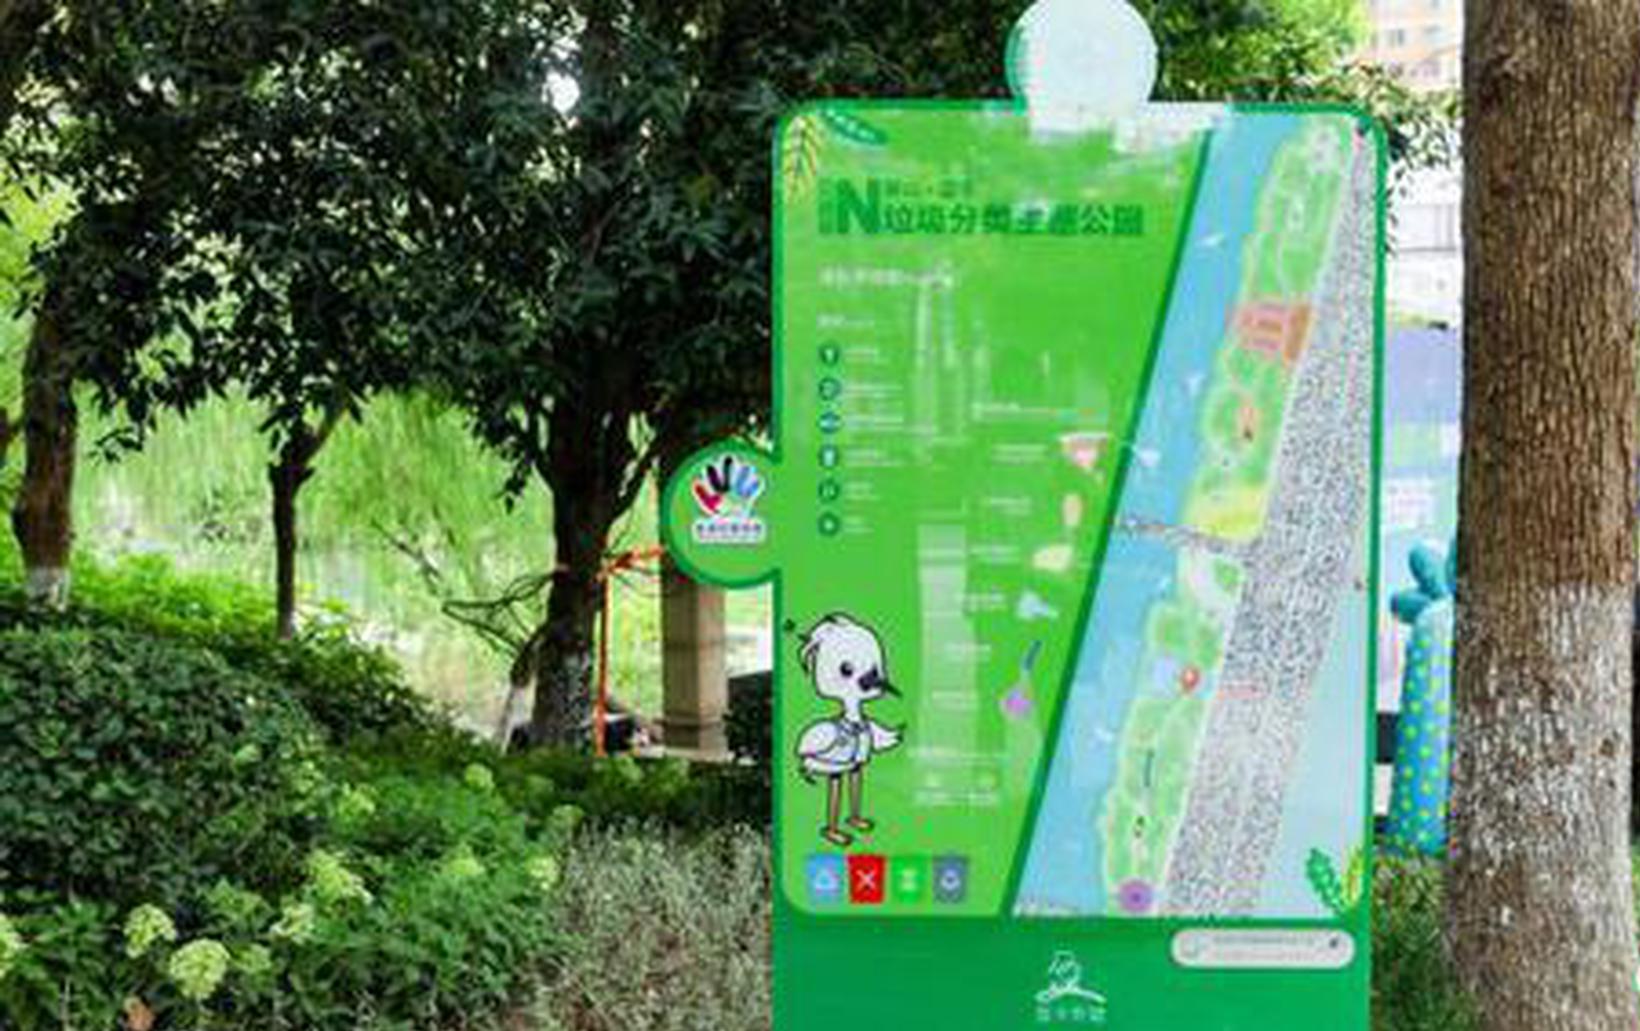 Green concepts extend from Asian Para Games to local life in Hangzhou